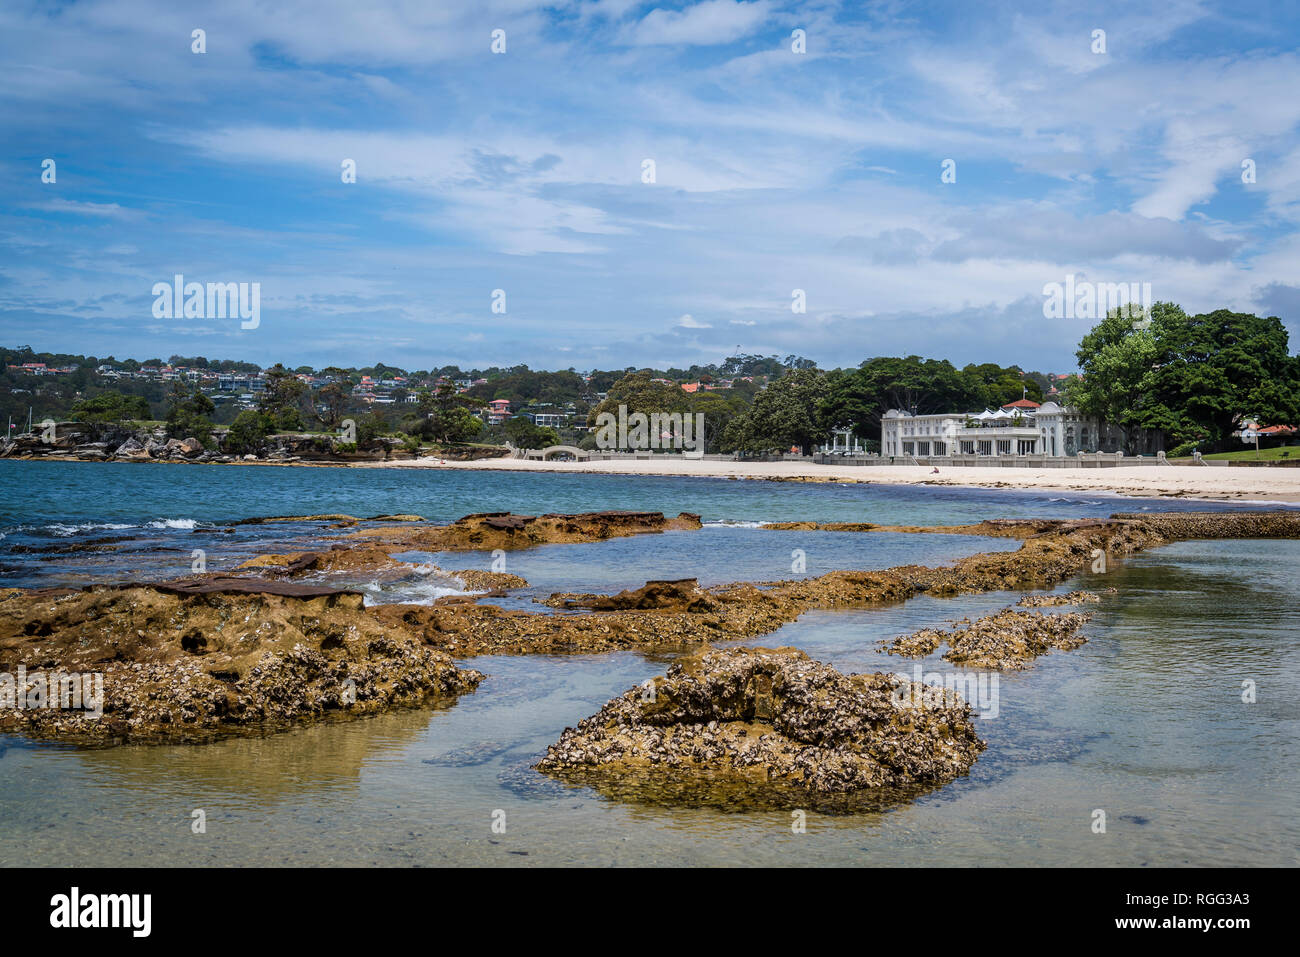 Balmoral Beach and Bathers’ Pavilion restaurant in distance, North Shore, Sydney, NSW, Australia Stock Photo